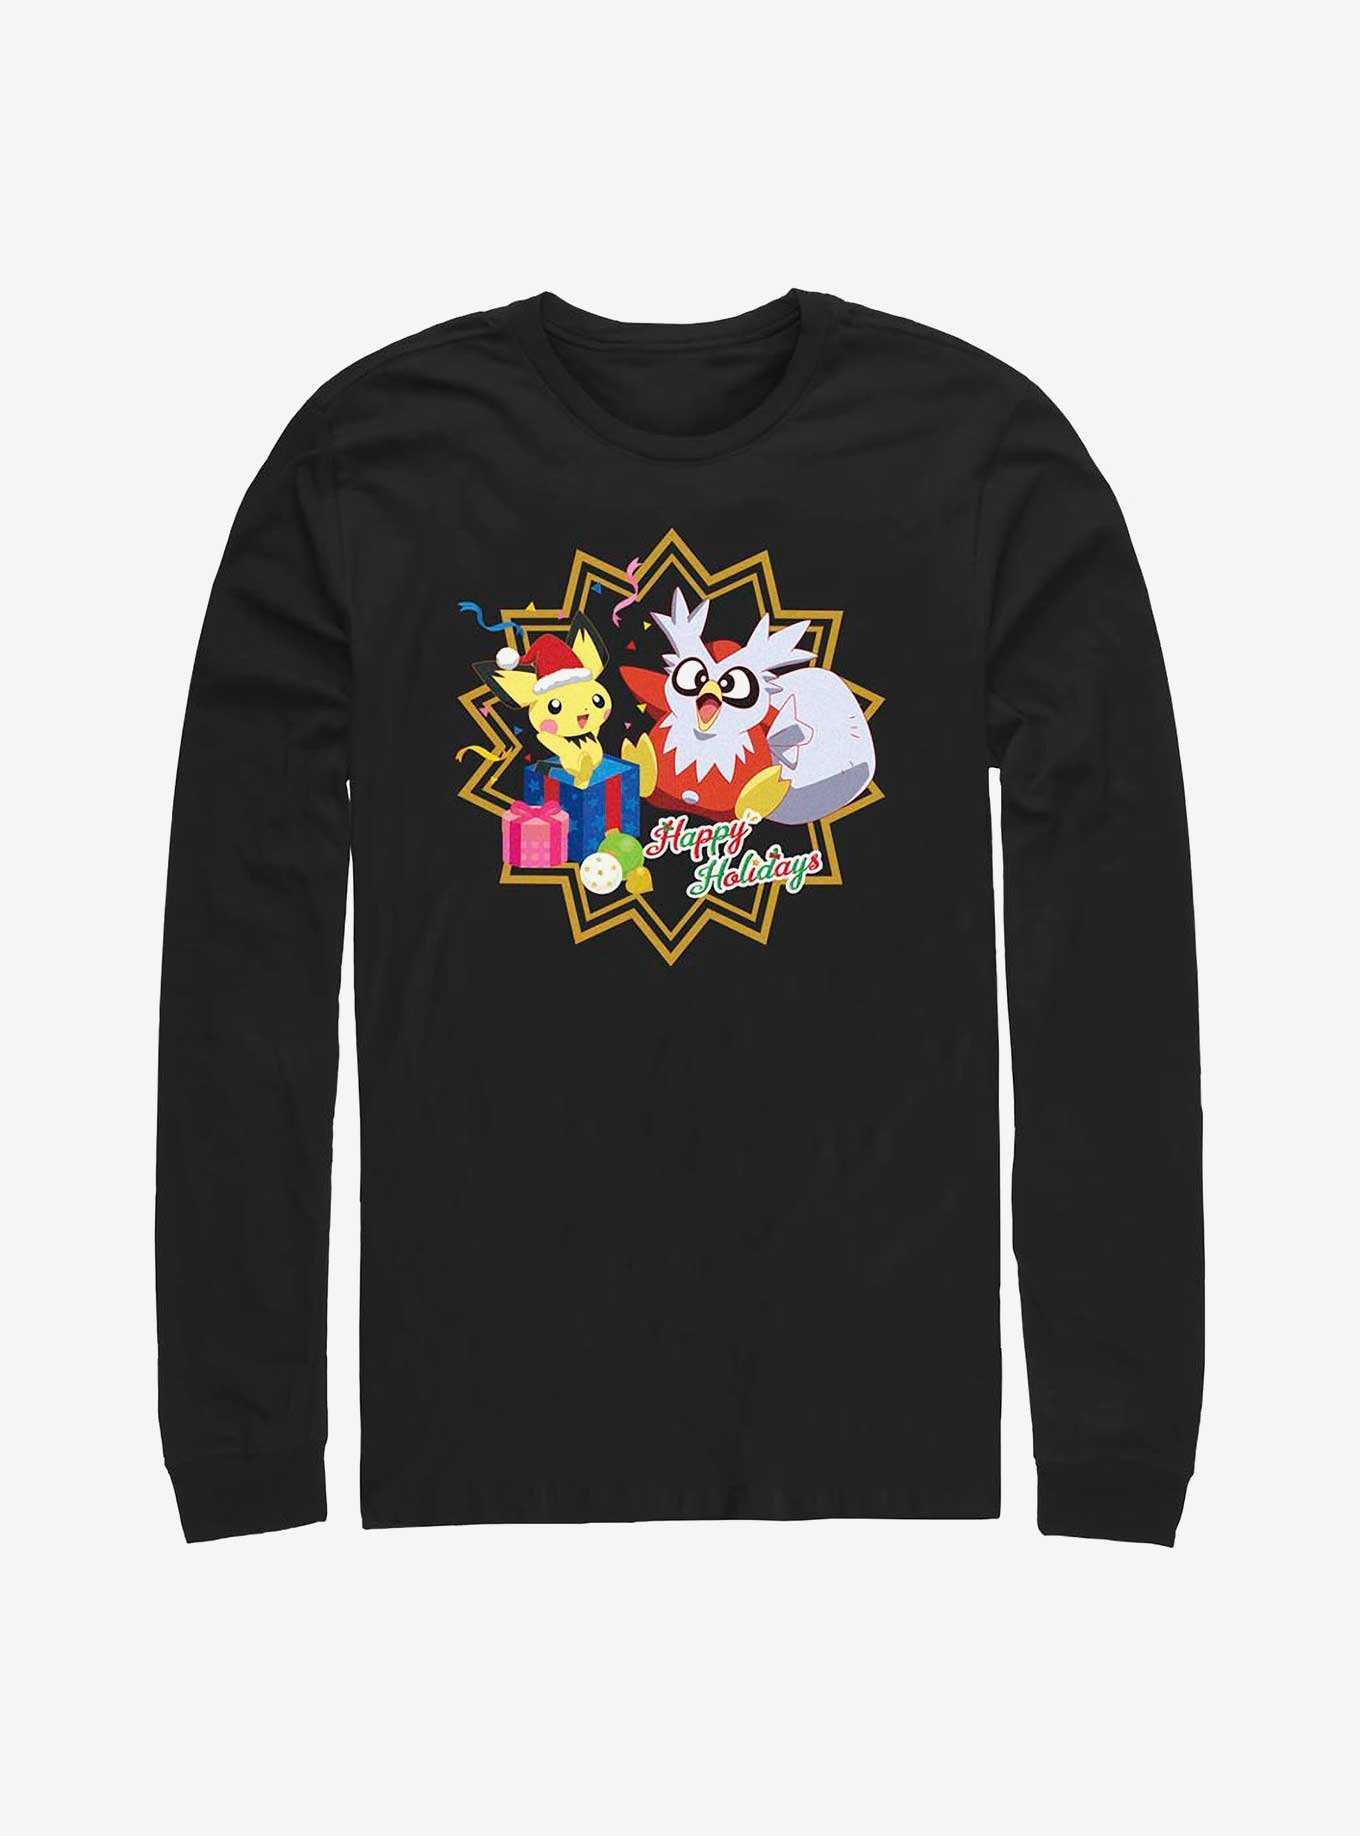 Pokémon Pichu And Delibird Holiday Party Long-Sleeve T-Shirt, , hi-res